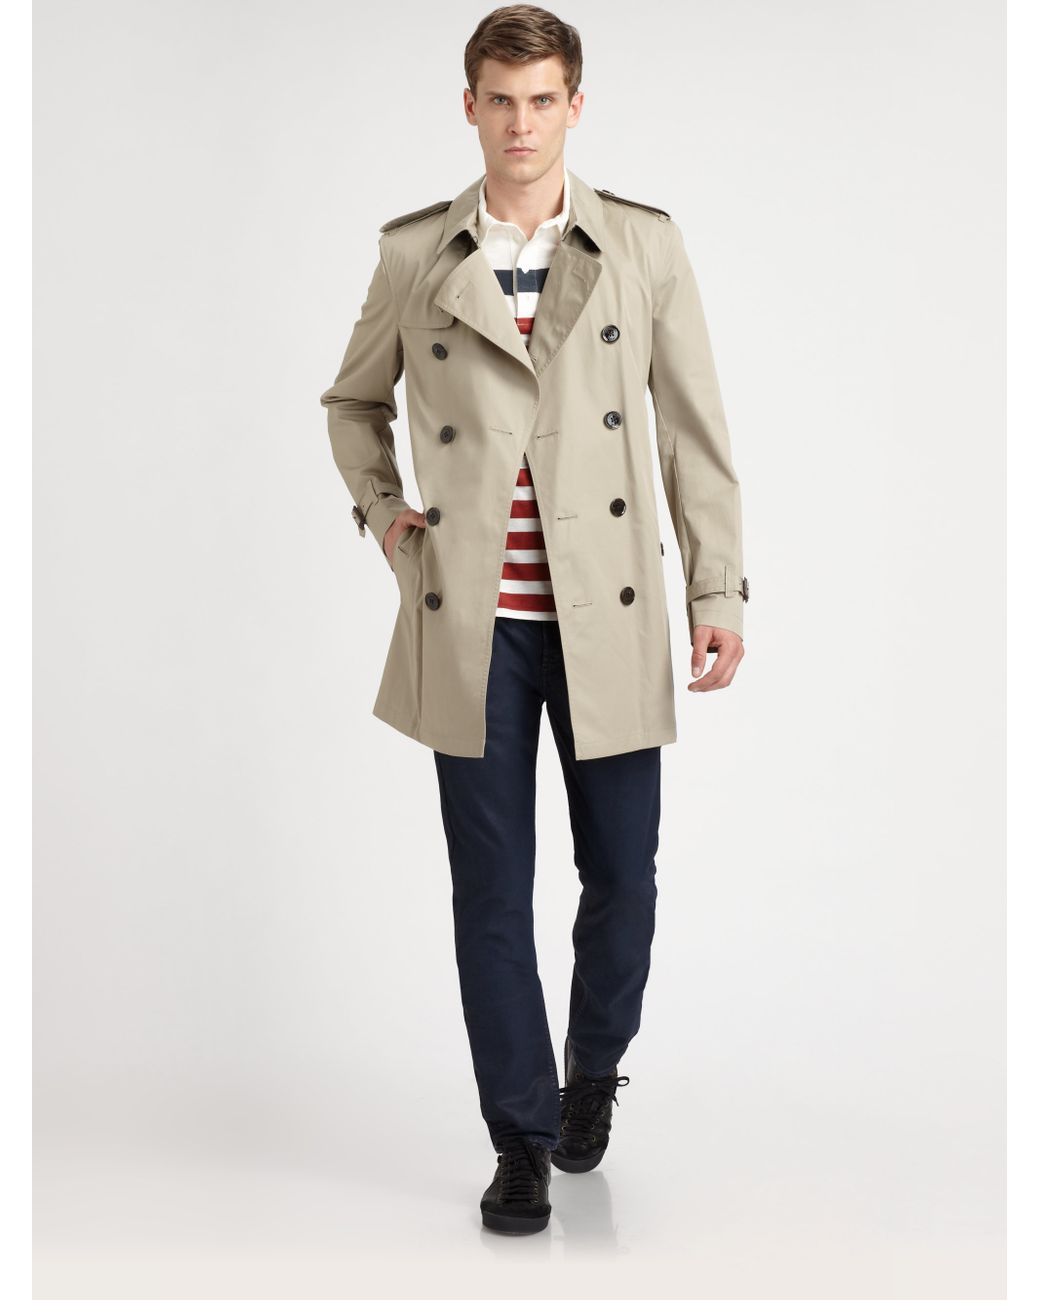 Burberry Brit Britton Double Breasted Trench Coat in Natural for Men | Lyst